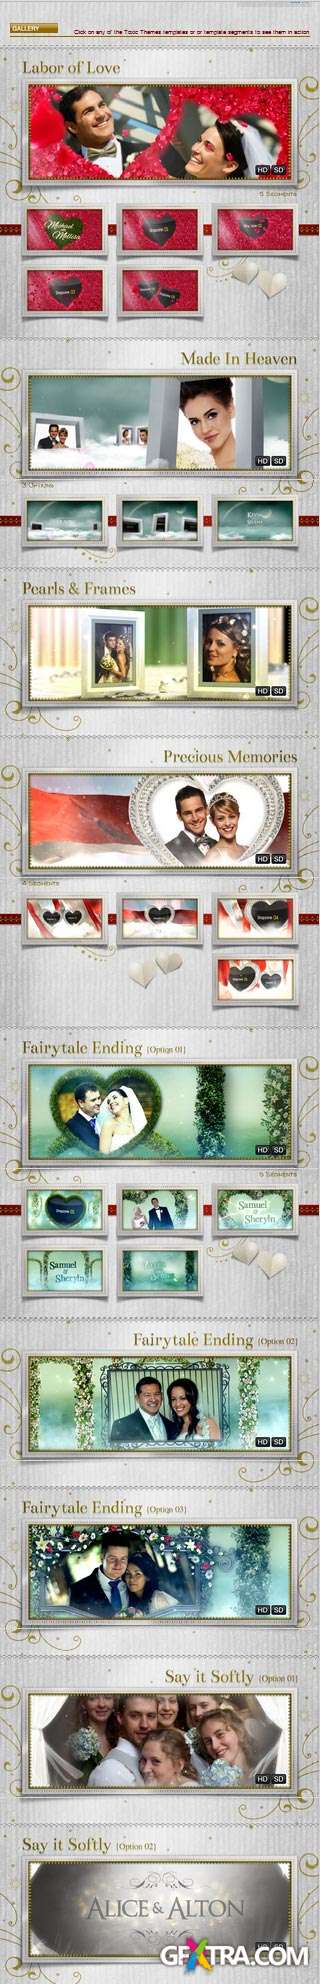 Toxic Themes Collection 1 - Wedding AE